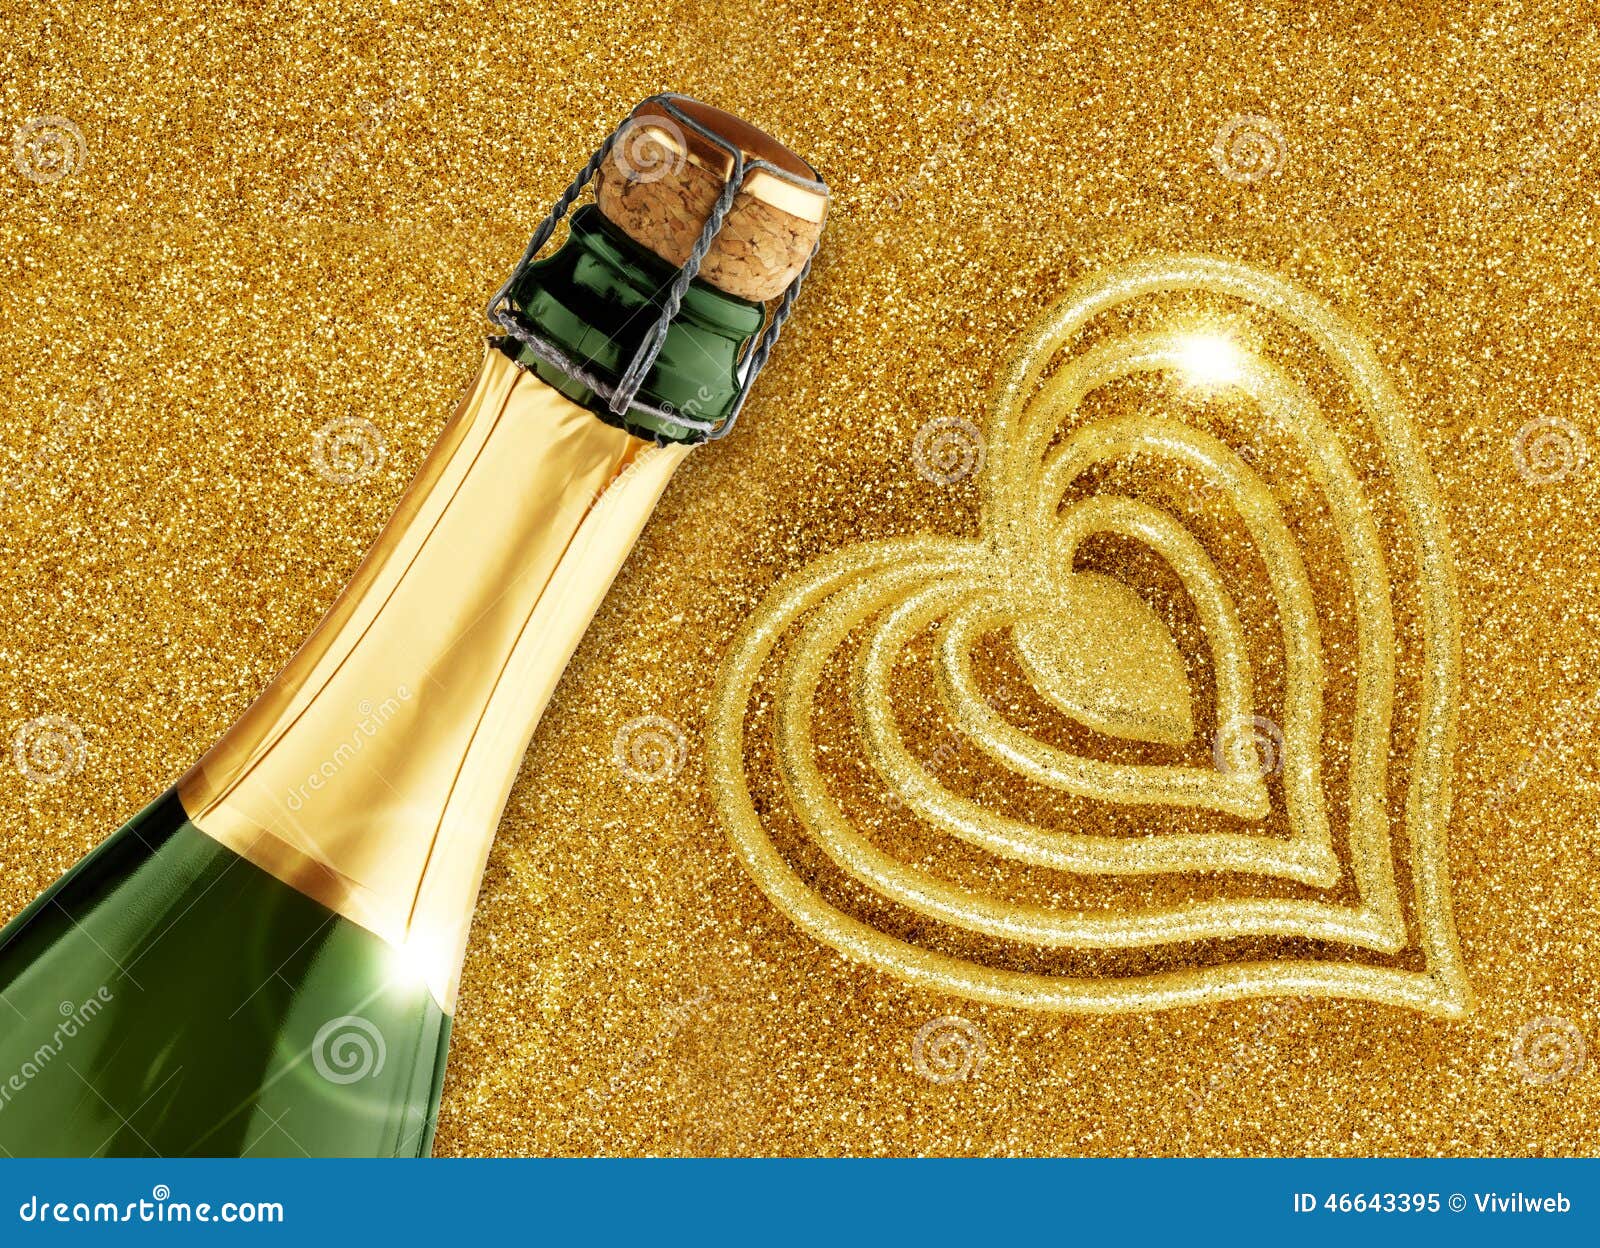 Champagne And Heart Shaped Decoration Stock Image Image Of Holiday Glitter 46643395